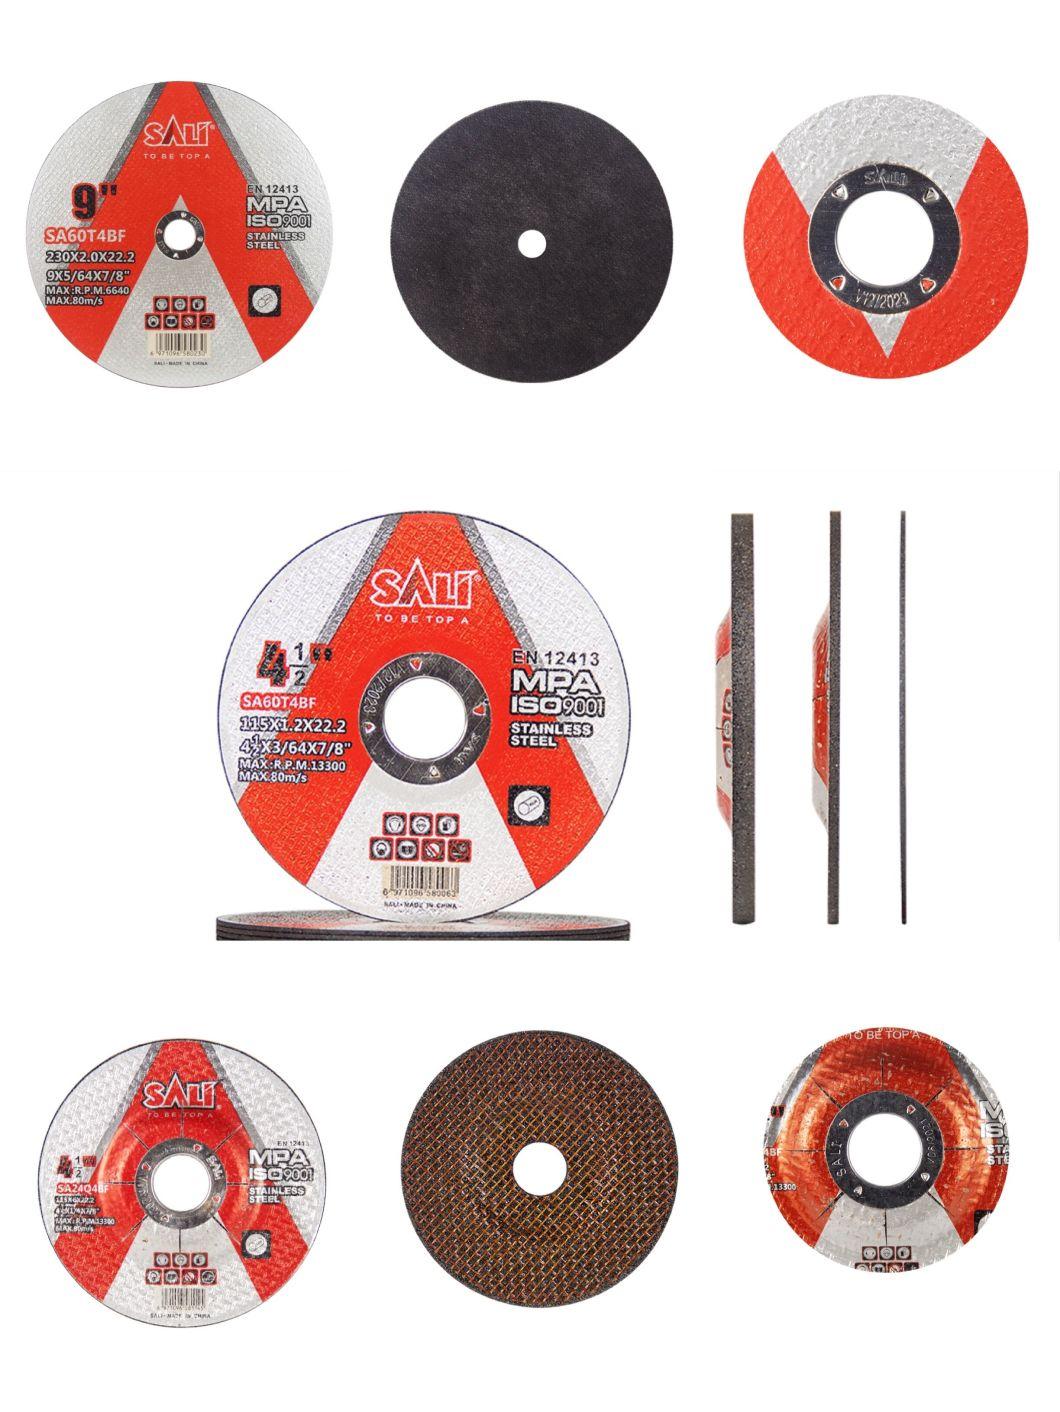 Sali 9inch 230*2.0*22mm Professonal Quality Stainless Steel Cutting Disc